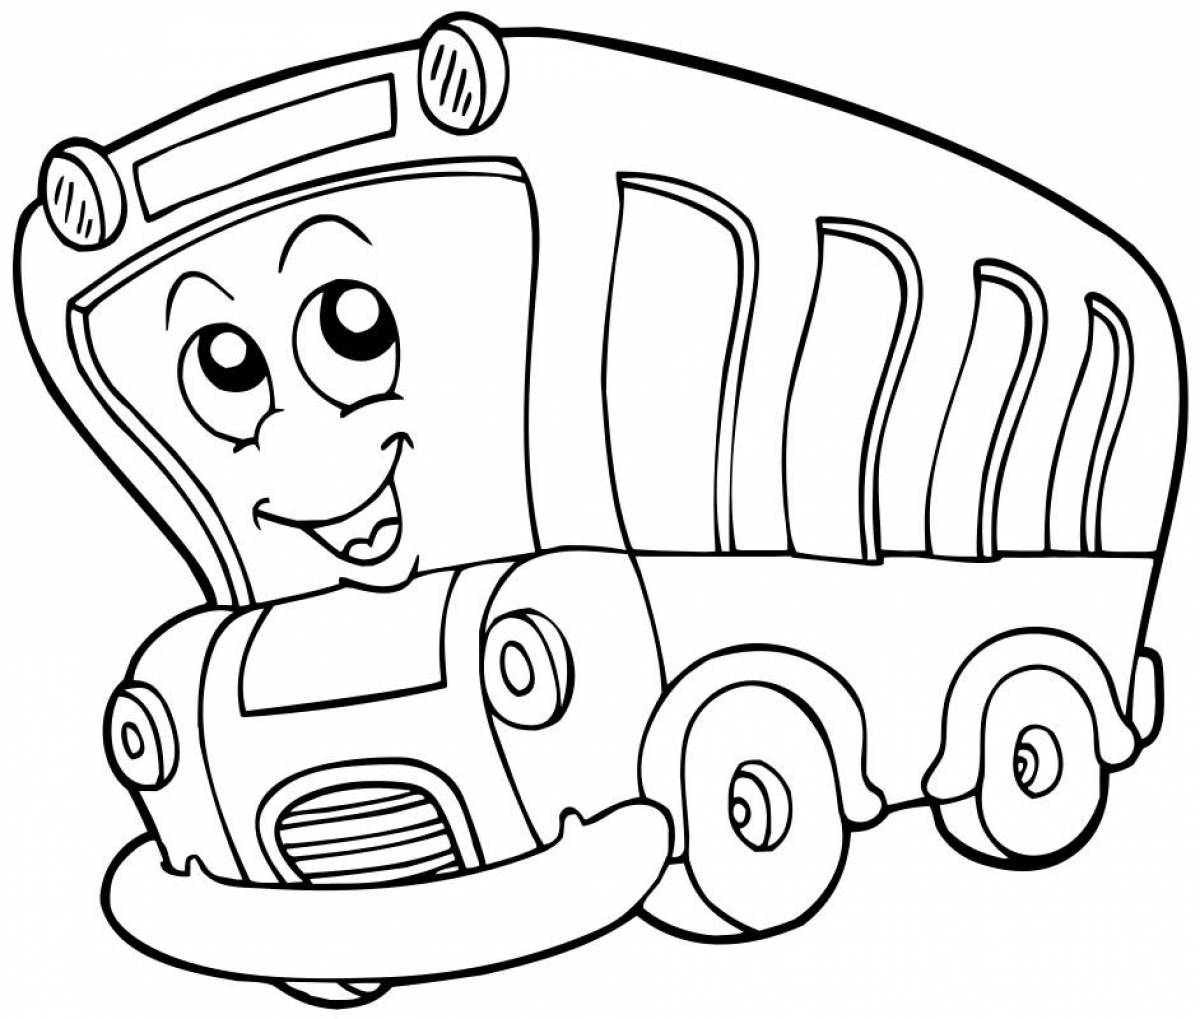 Coloring page magical transport for children 3-4 years old